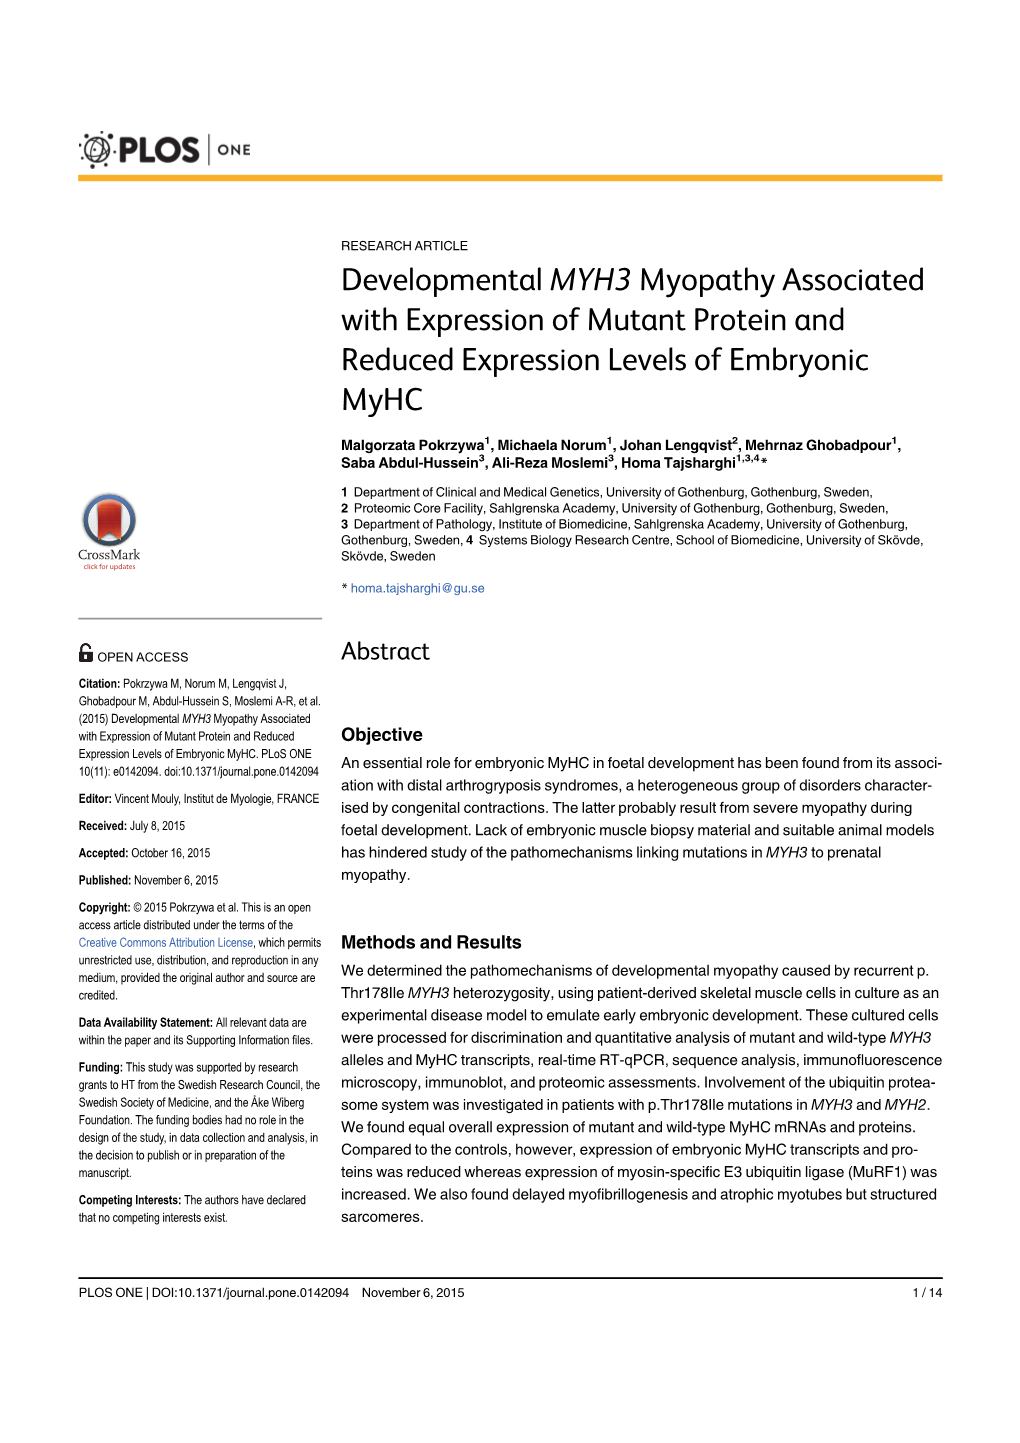 Developmental MYH3 Myopathy Associated with Expression of Mutant Protein and Reduced Expression Levels of Embryonic Myhc